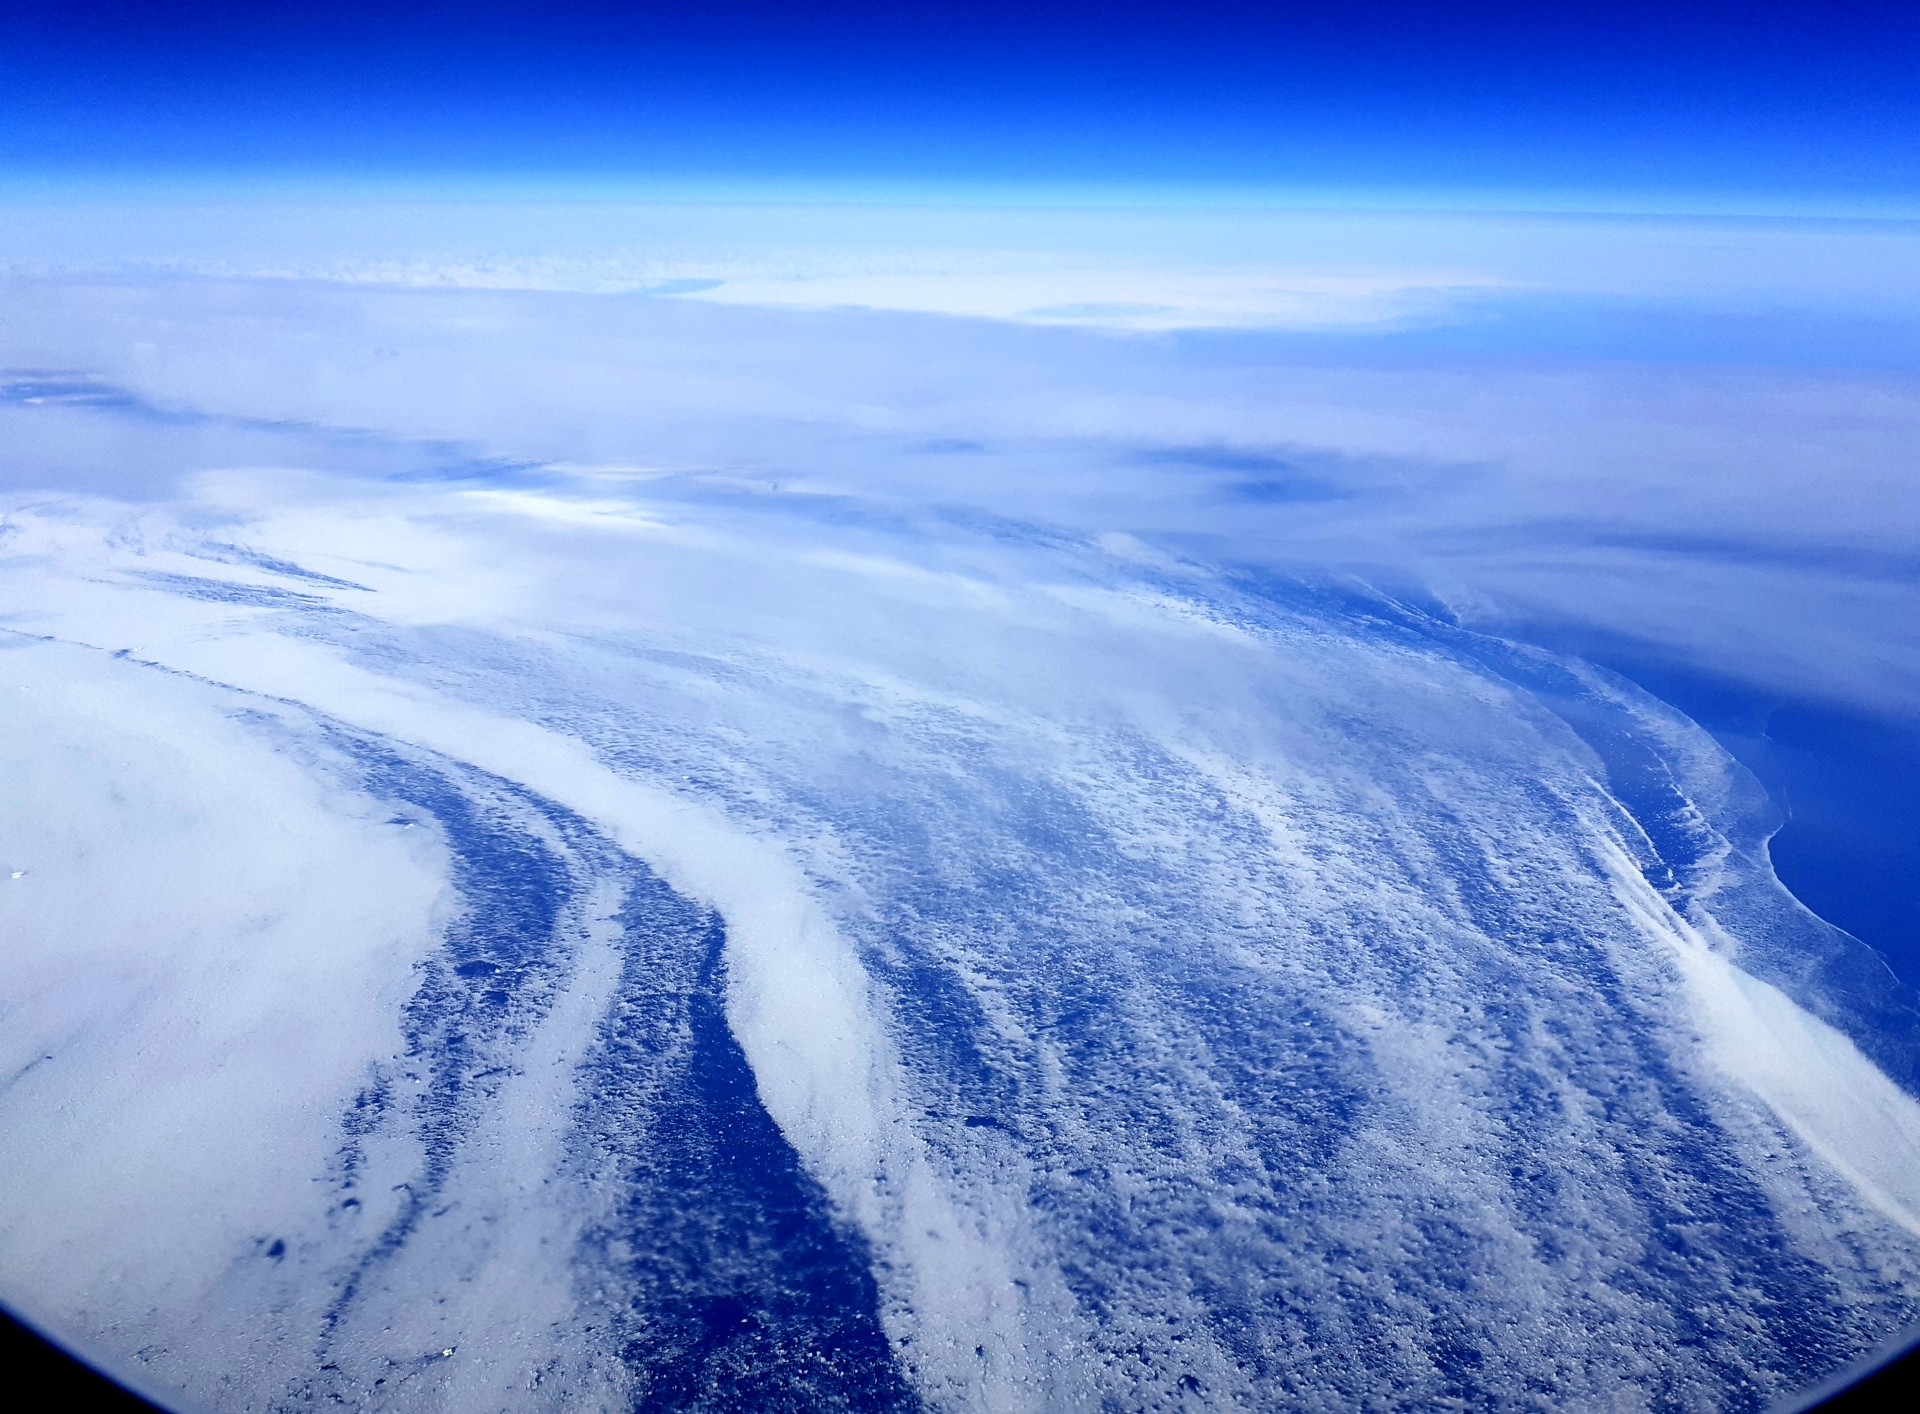 the southern tip of Greenland as seen from the sky